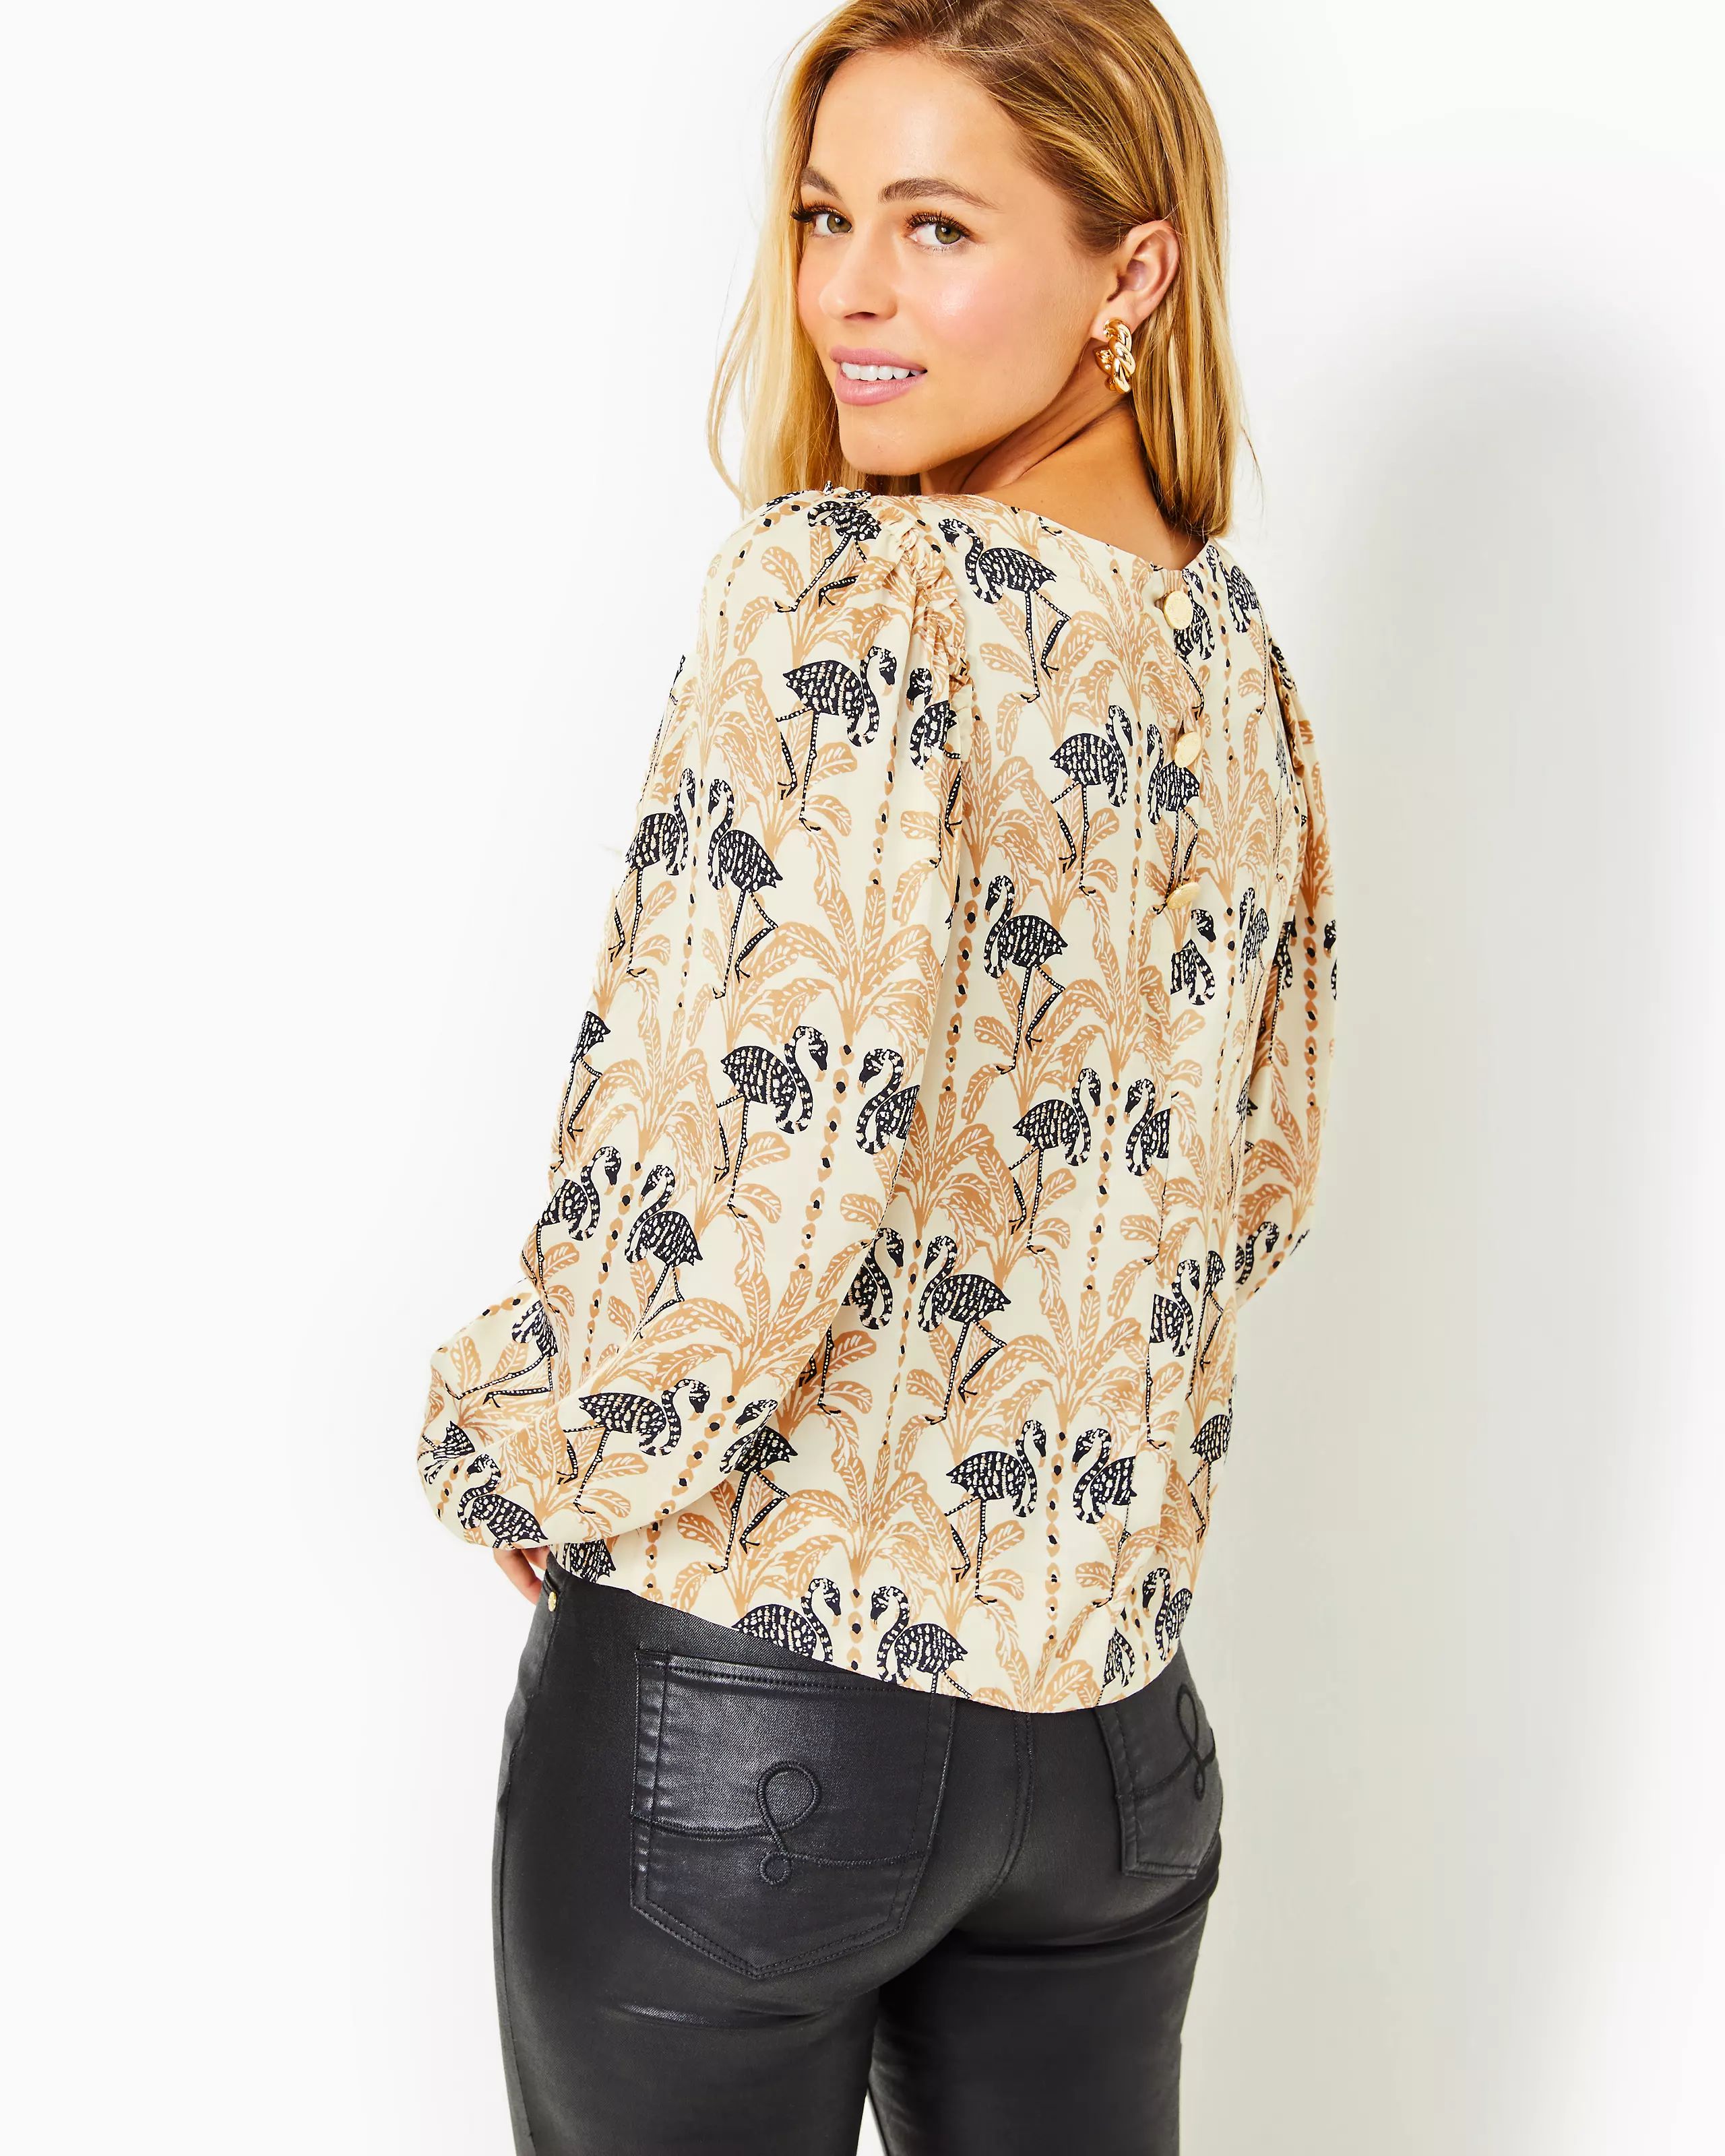 Everglade Long Sleeve Top | Lilly Pulitzer